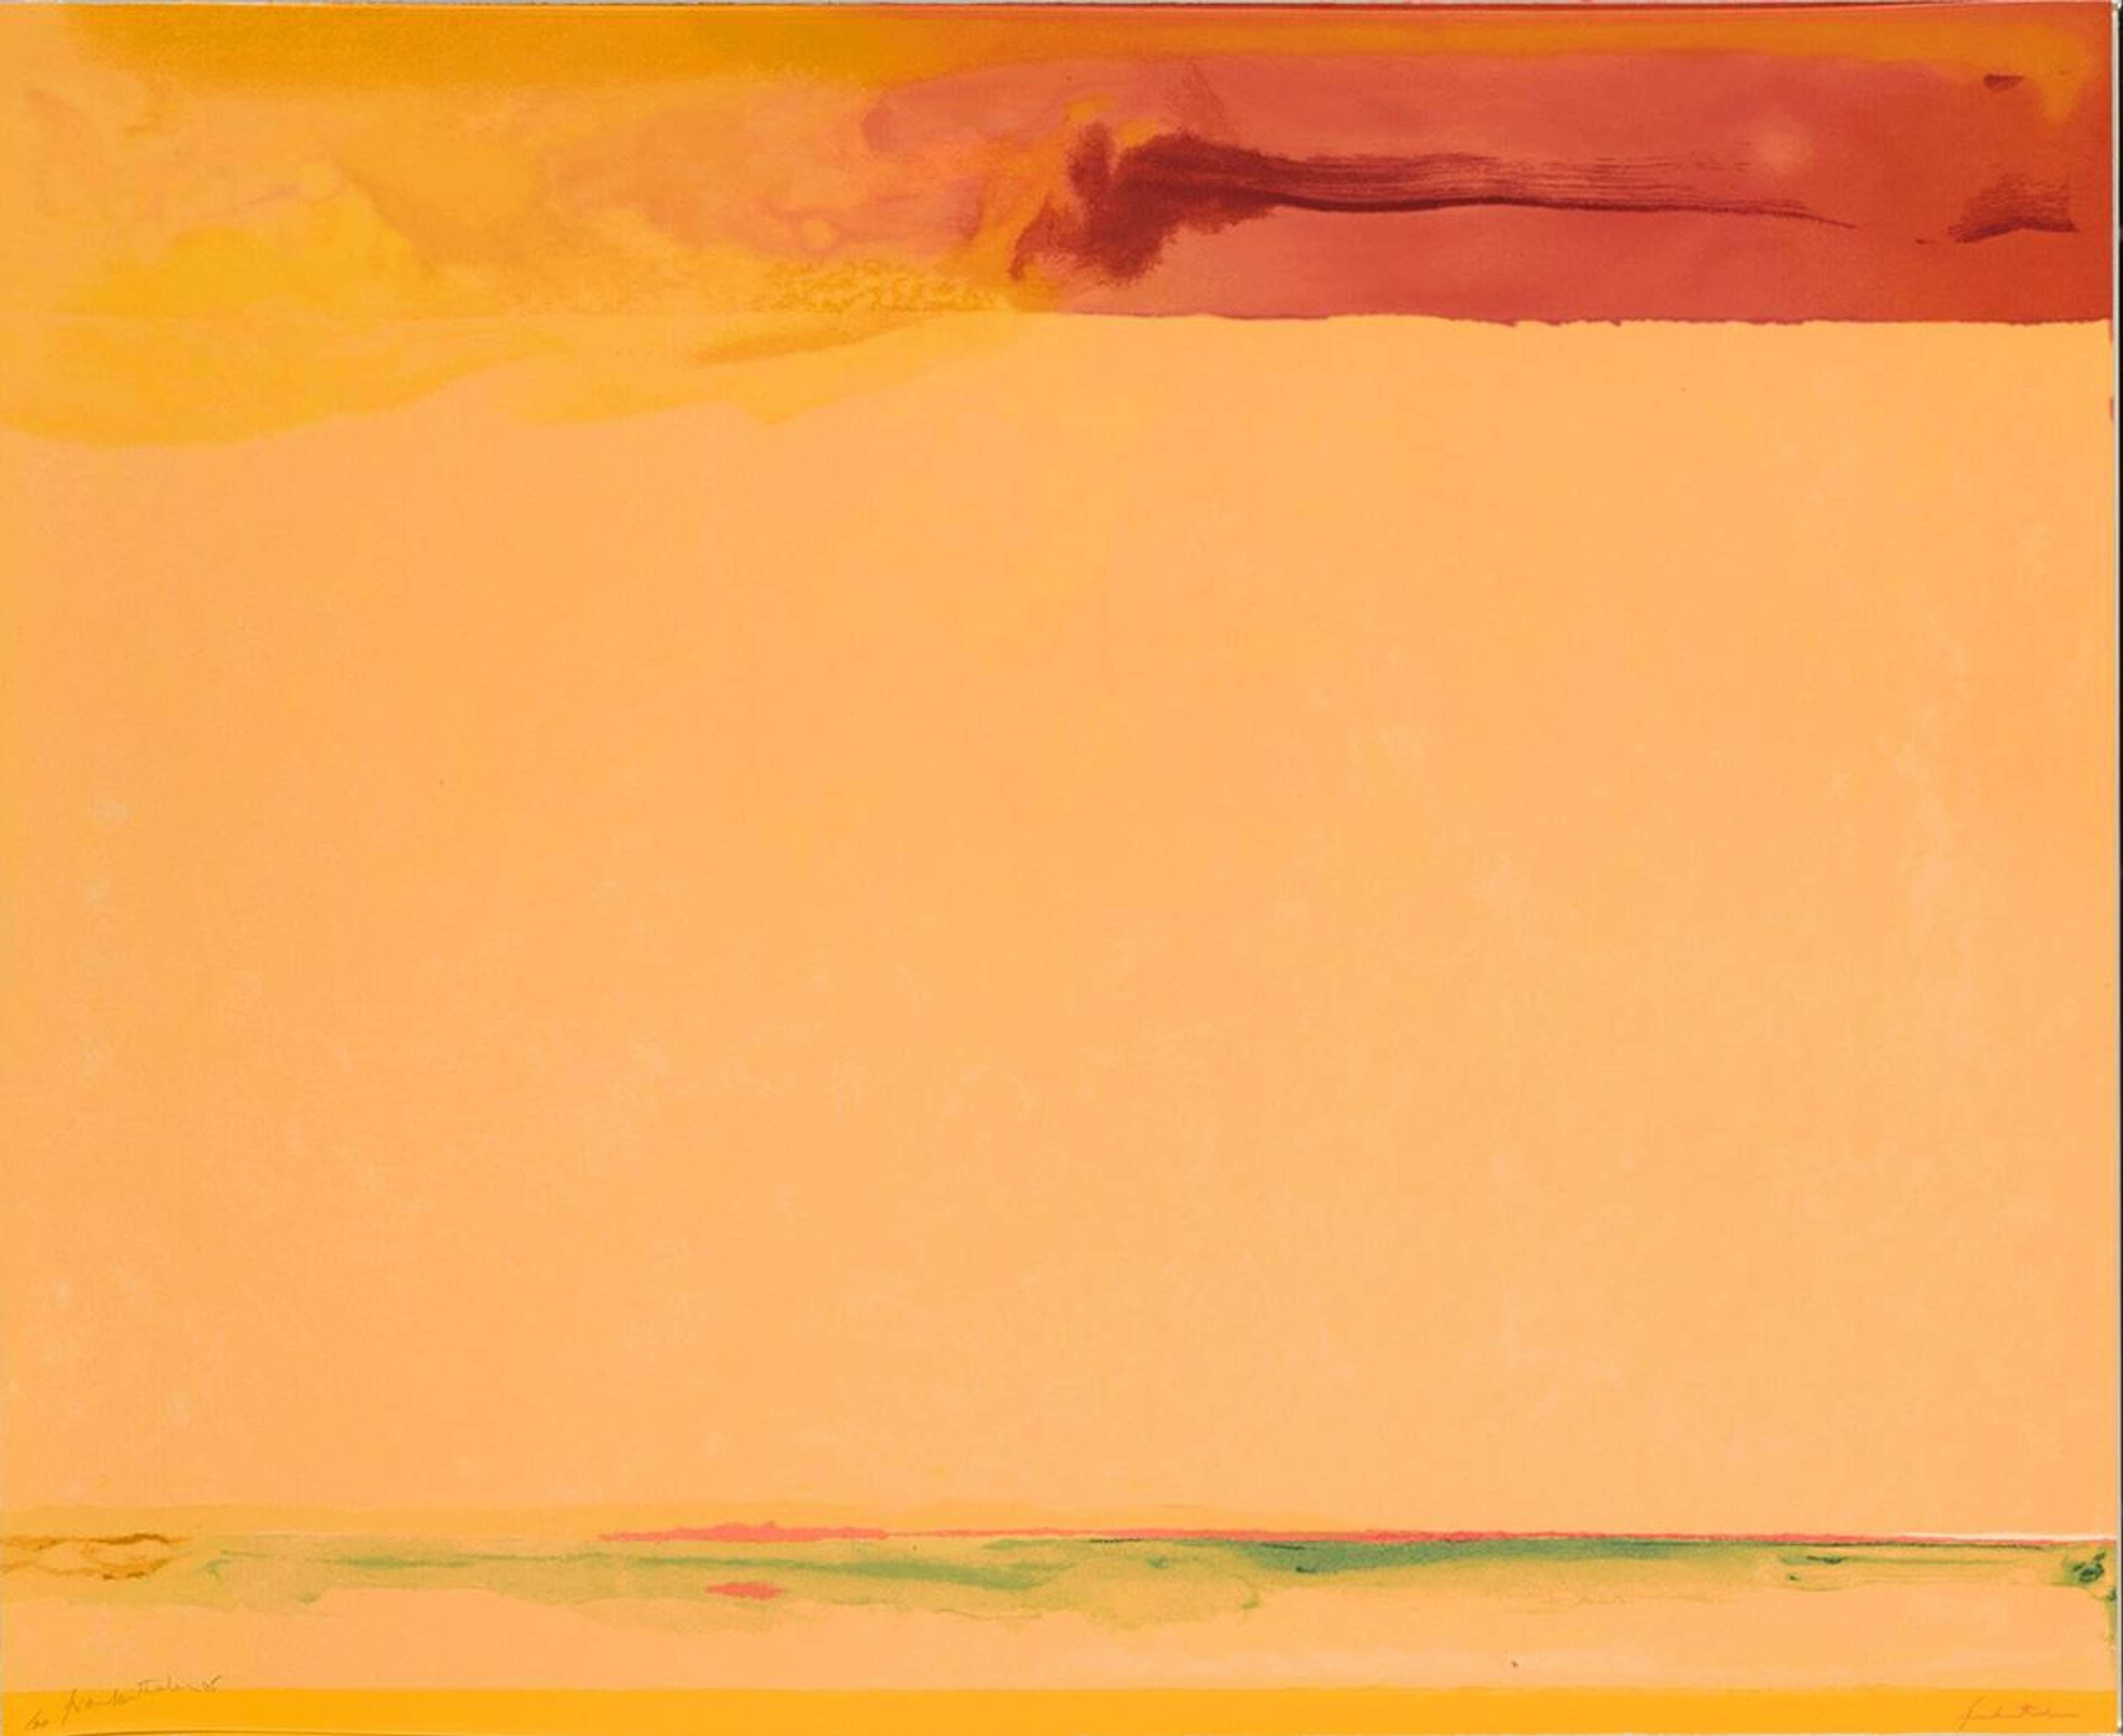 Helen Frankenthaler’s Southern Exposure. An abstract expressionist screenprint of a landscape using orange, red and yellow.